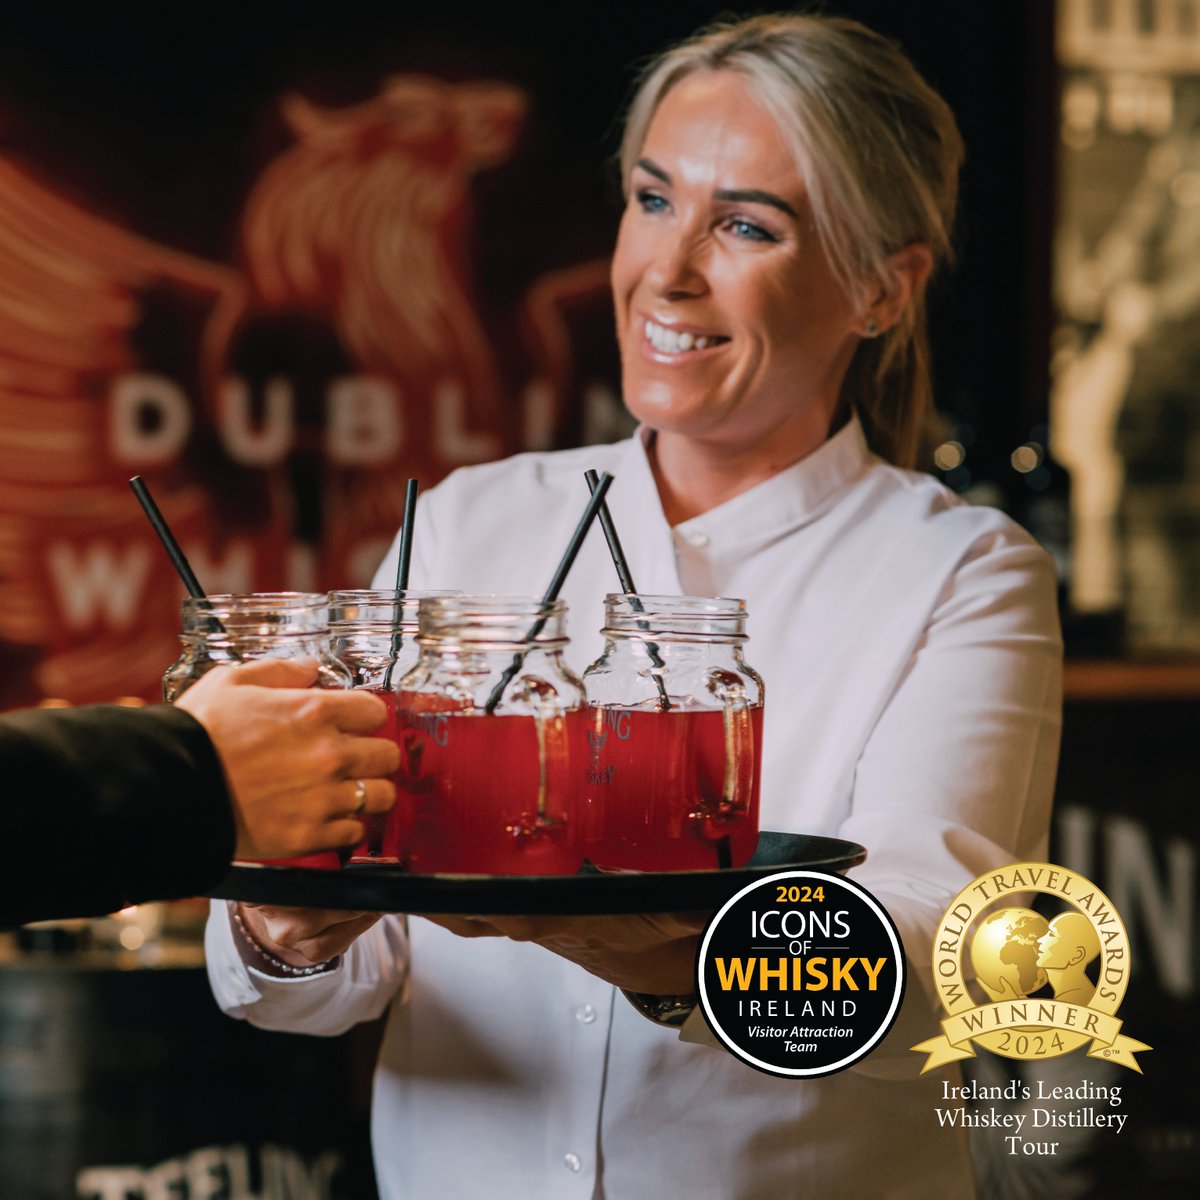 Back to back awards! Not only did we recently receive the award for World's Best Visitor Attraction Team at the World Whiskey Awards last week, but we can now raise a glass of our finest Teeling as Ireland's Leading Whiskey Distillery Tour for the first time ever!